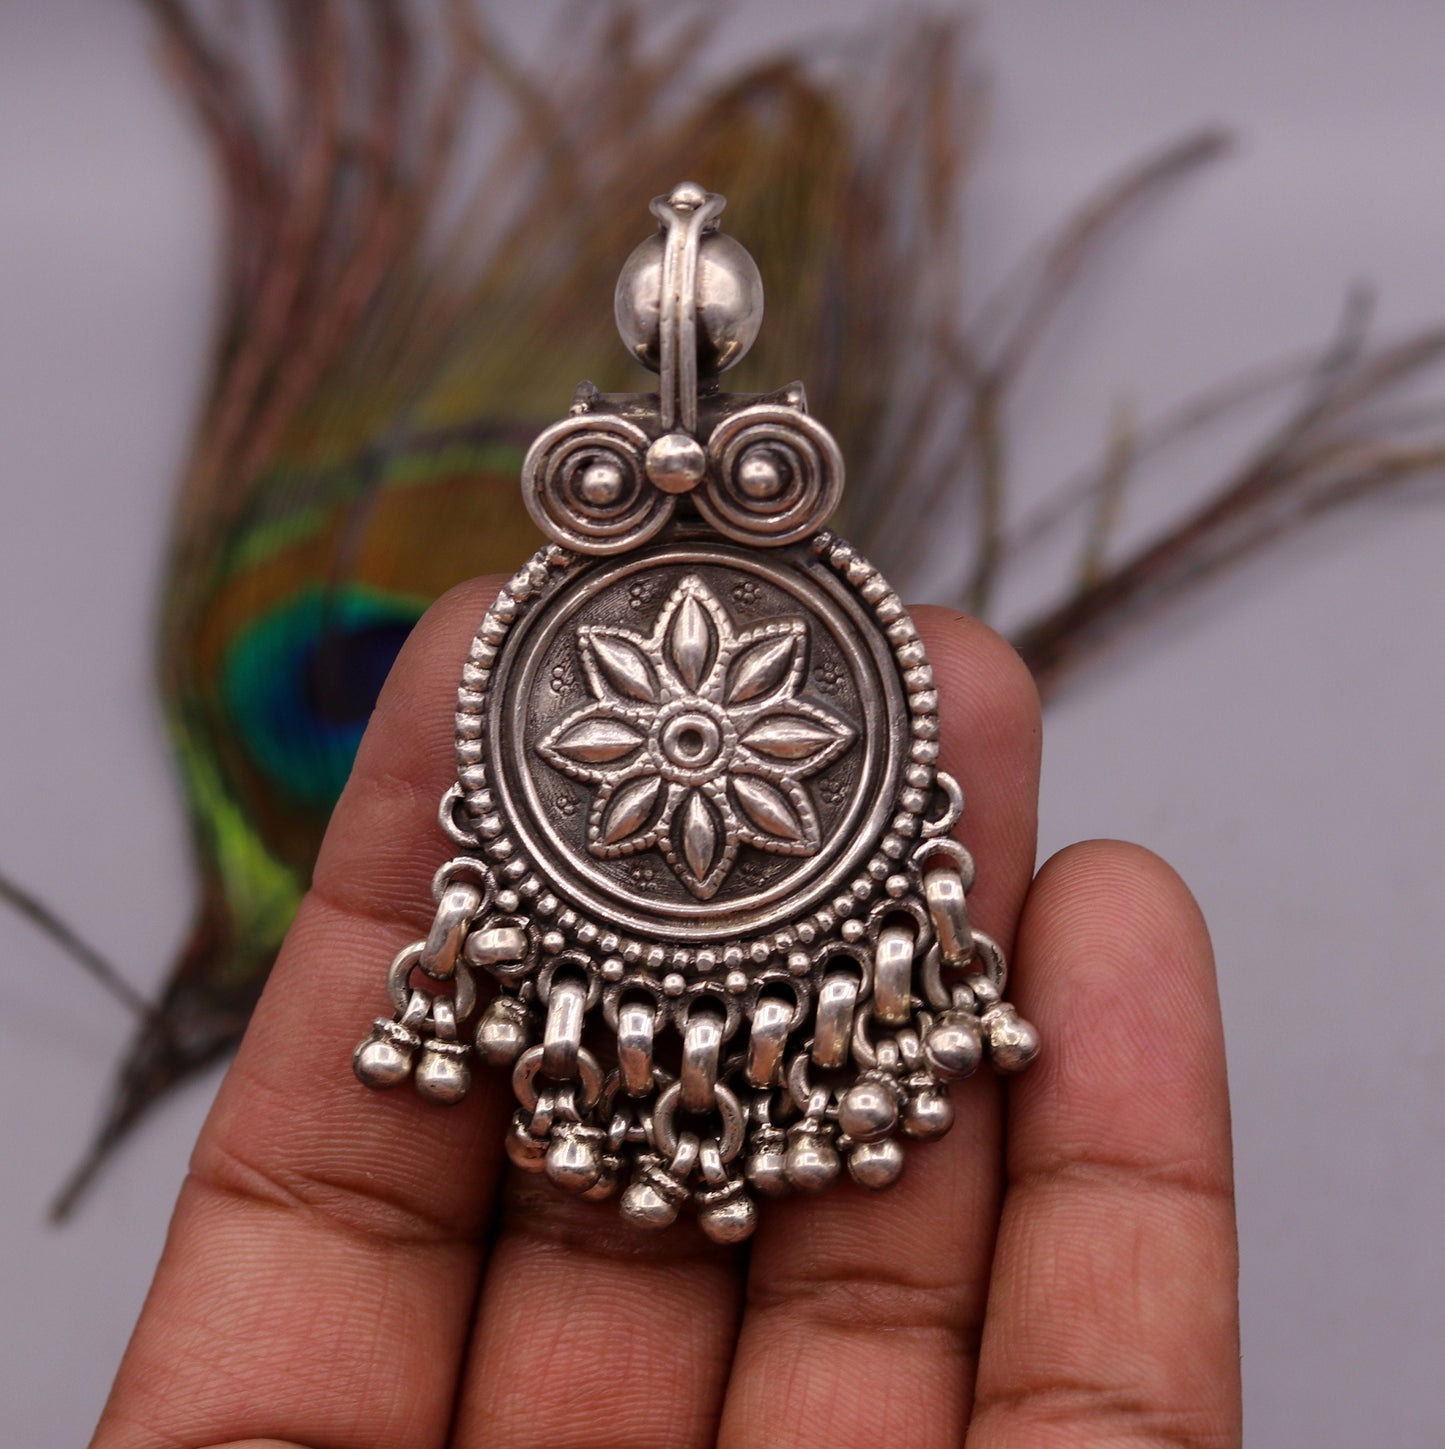 Handmade design 925 sterling silver excellent flower design vintage antique tribal pendant with hanging bells gifting jewelry nsp254 - TRIBAL ORNAMENTS